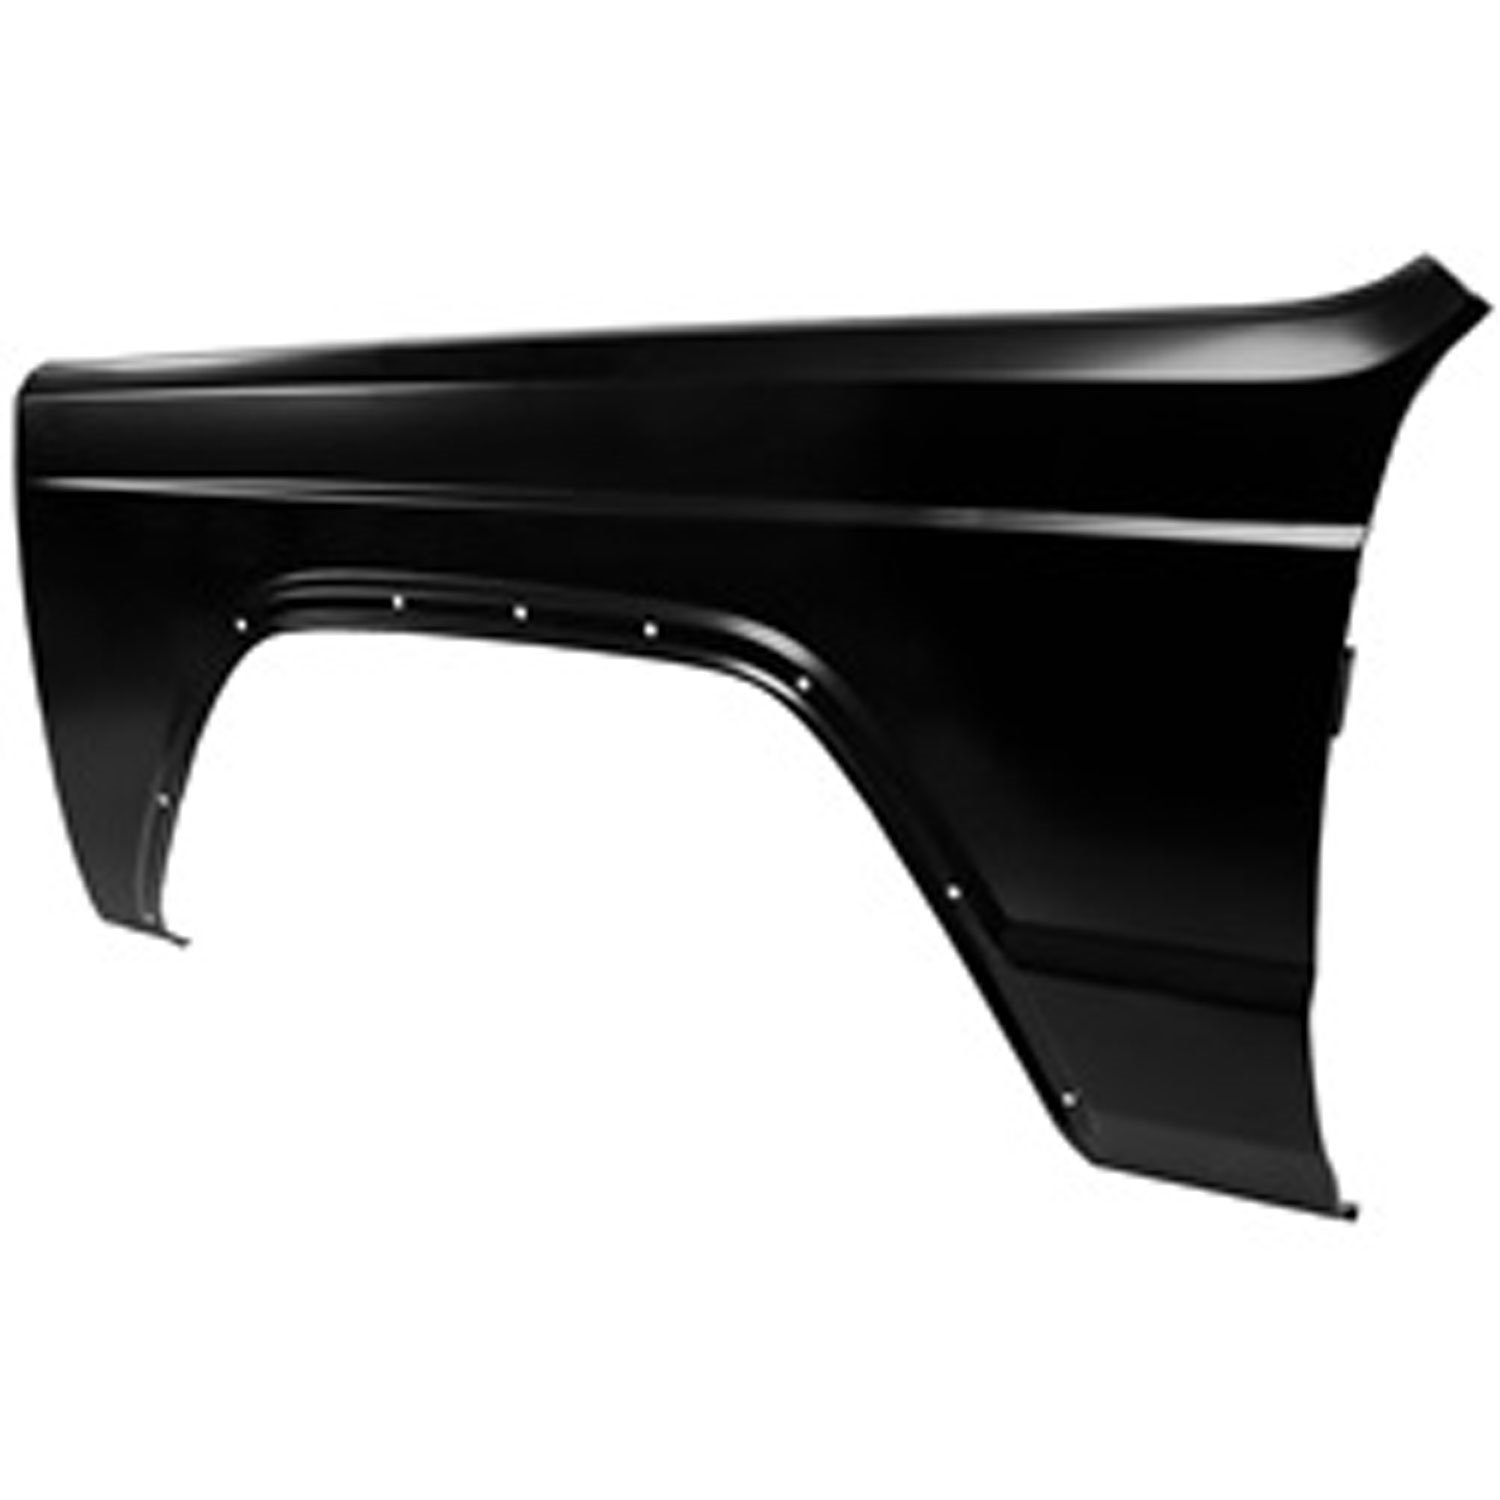 Replacement front fender from Omix-ADA, Fits left side